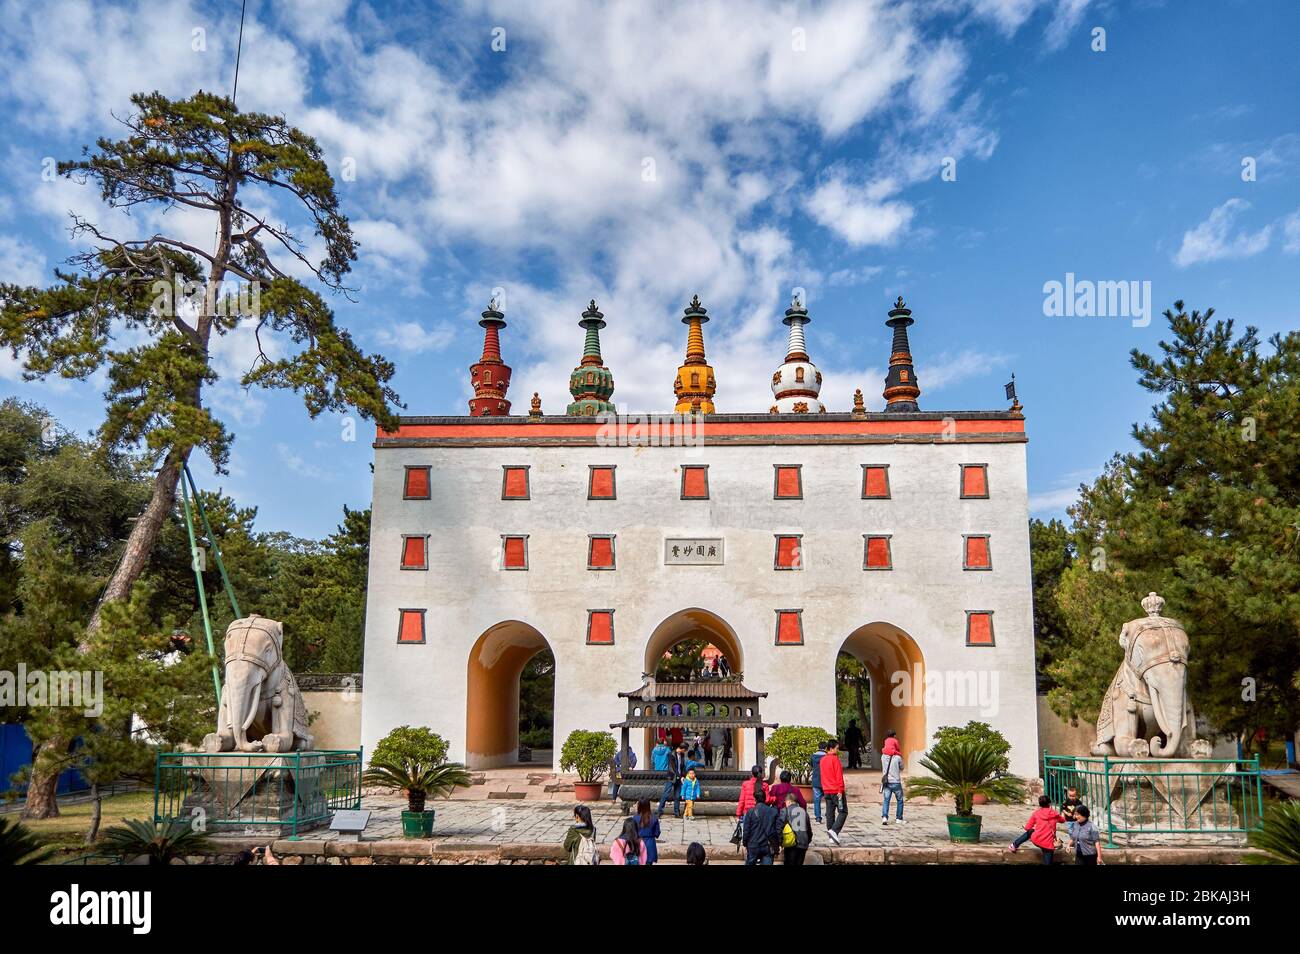 Chengde / China - October 3, 2014: Entrance to the Putuo Zongcheng Buddhist Temple, one of the Eight Outer Temples of Chengde, built between 1767 and Stock Photo